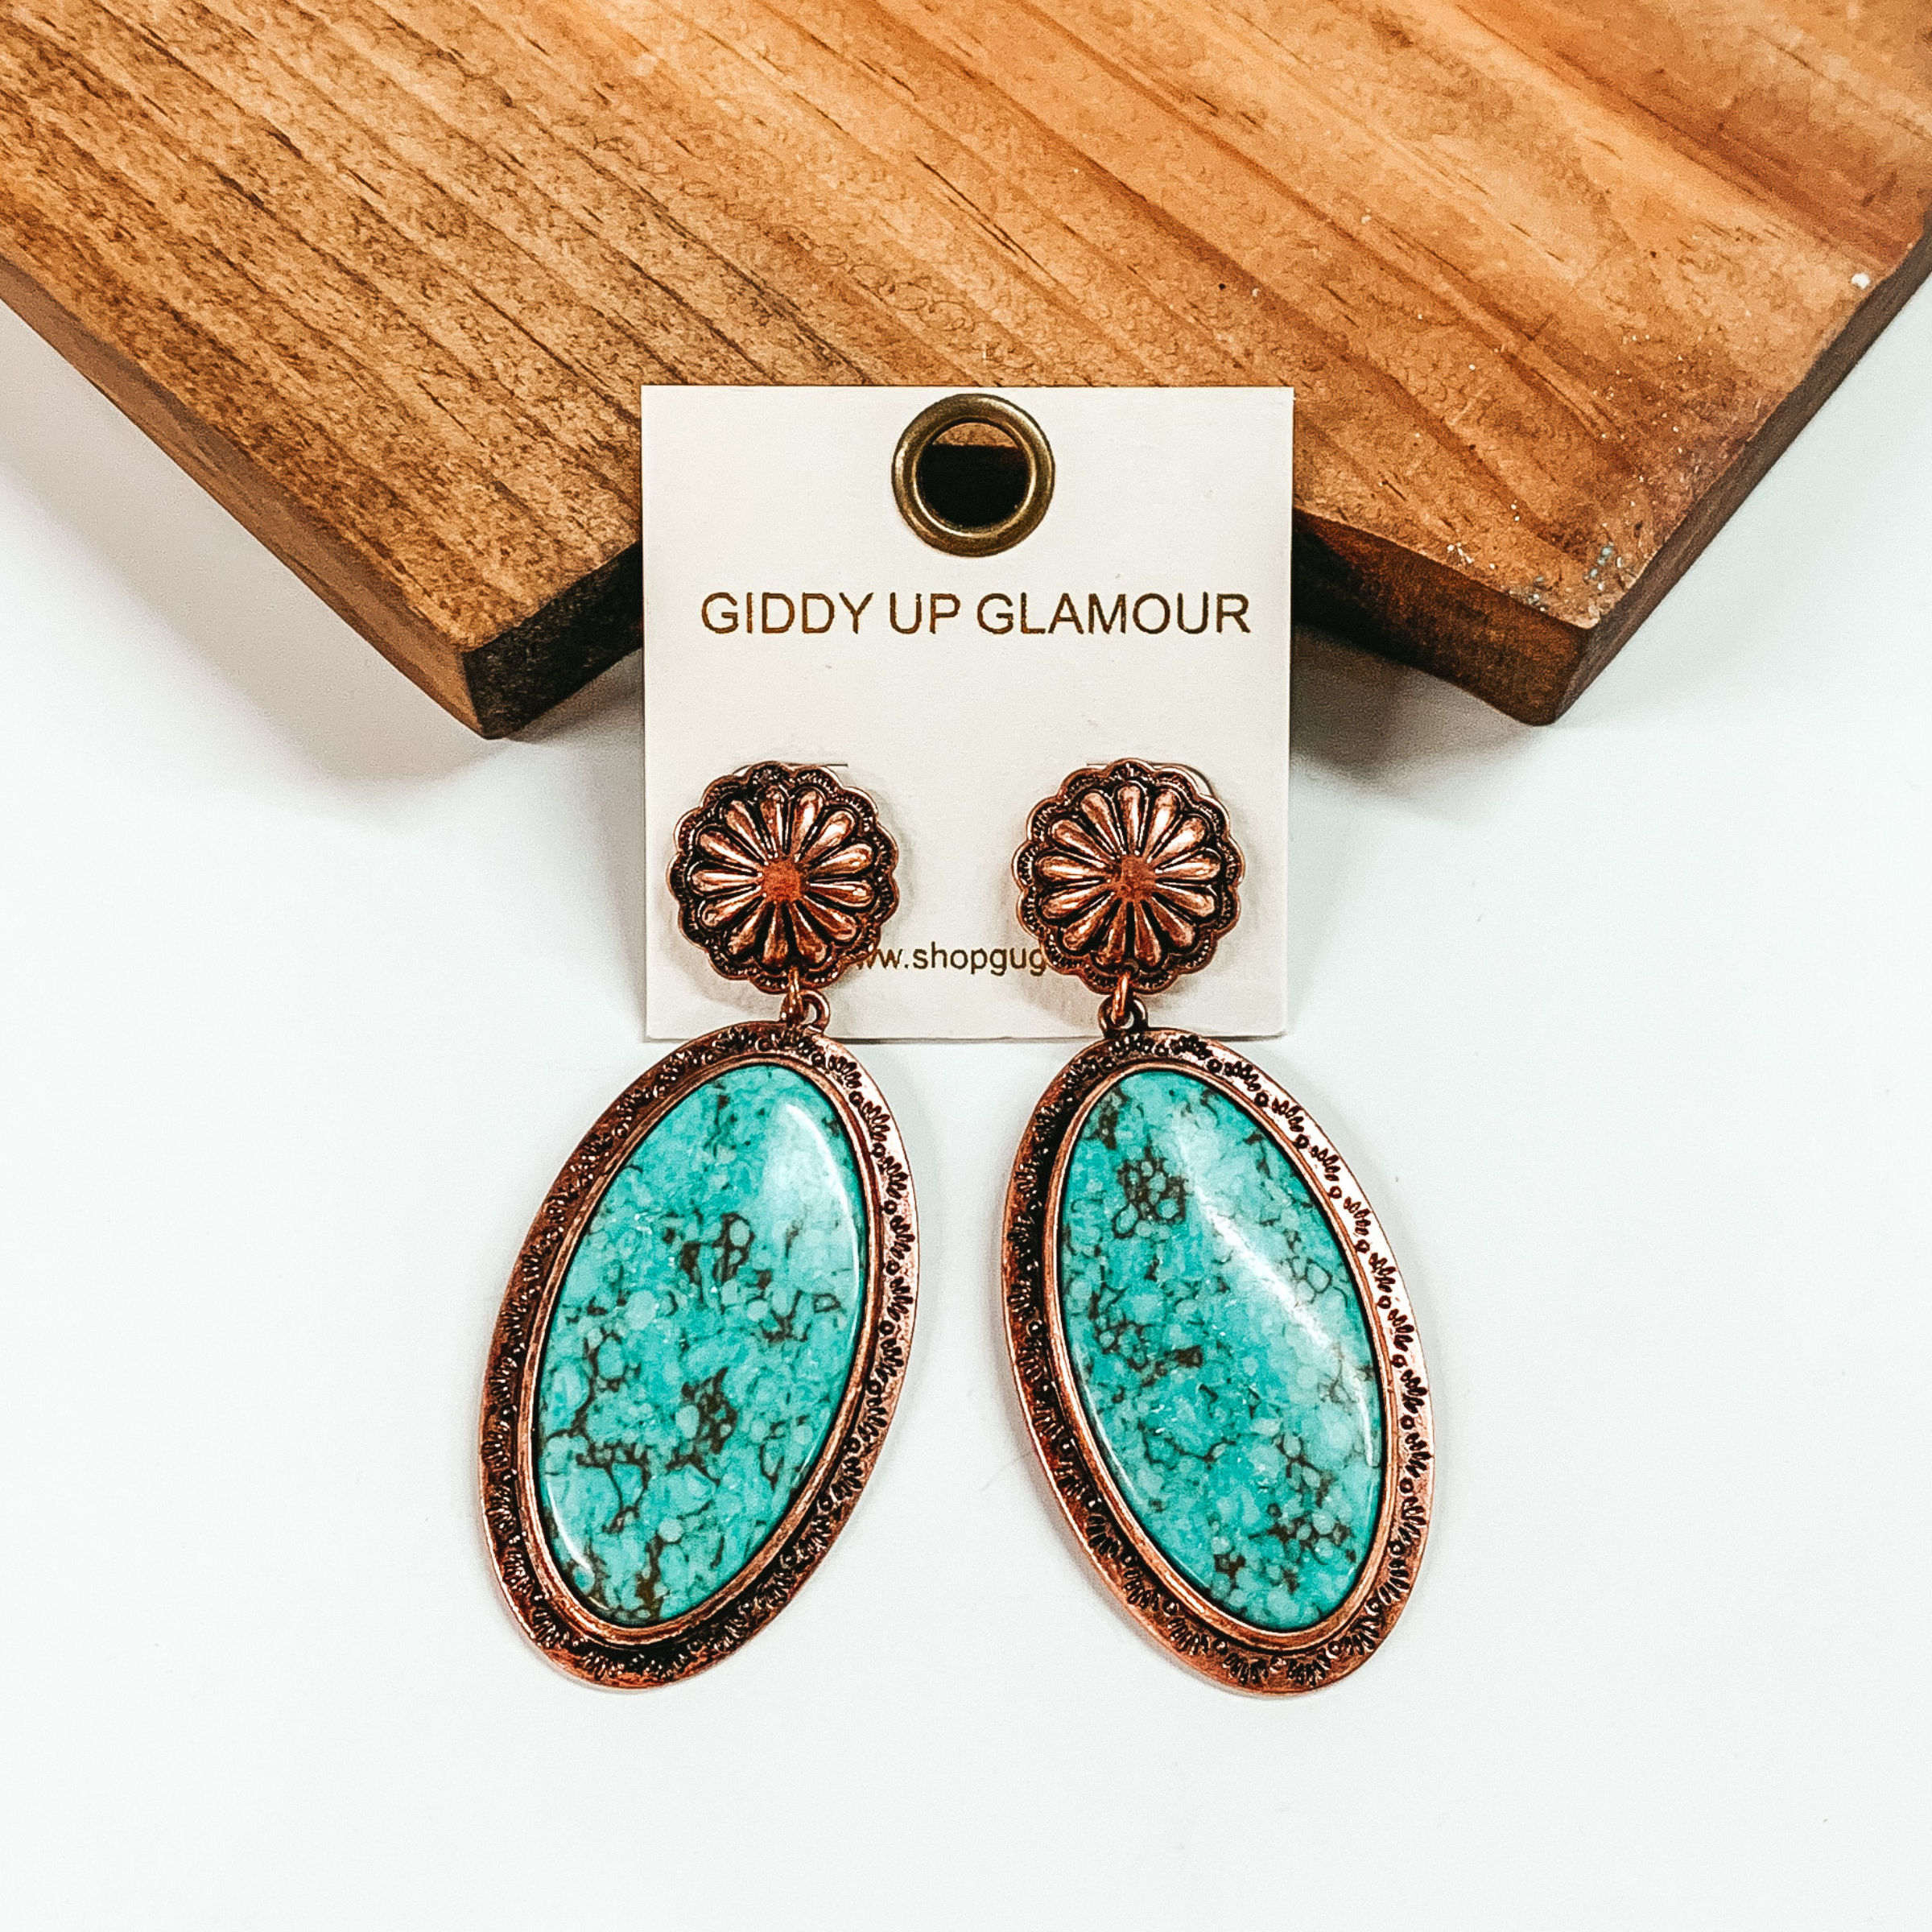 Copper, circle concho earrings with an oval drop. The oval drop is a turquoise stone with a copper outline. These earrings are pictured in front of a brown block on a white background. 